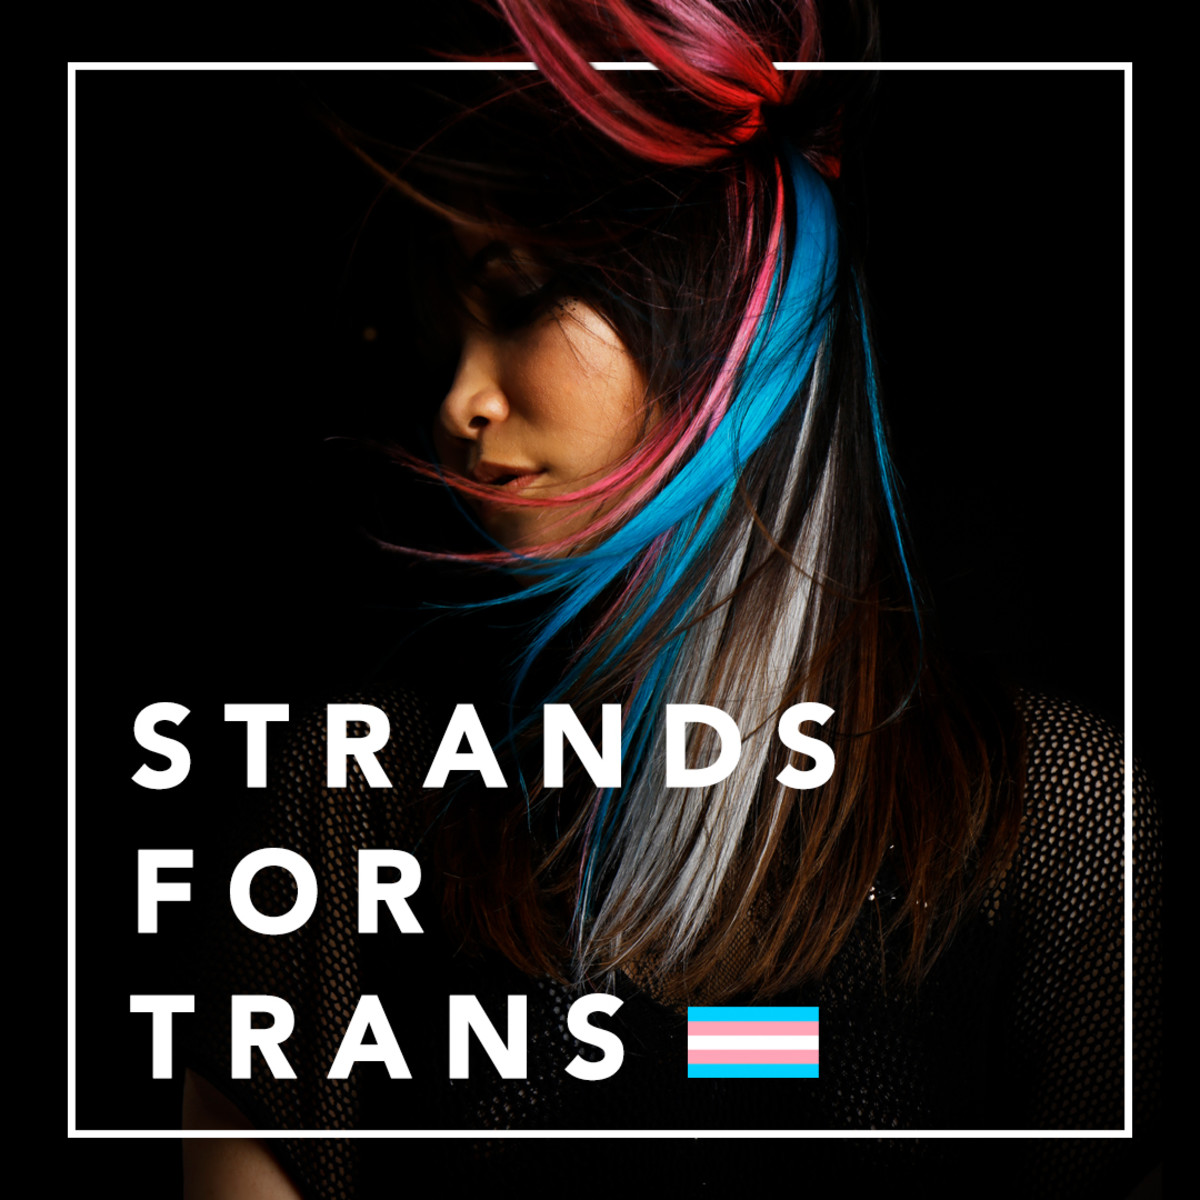 Photo: Courtesy of Strands for Trans